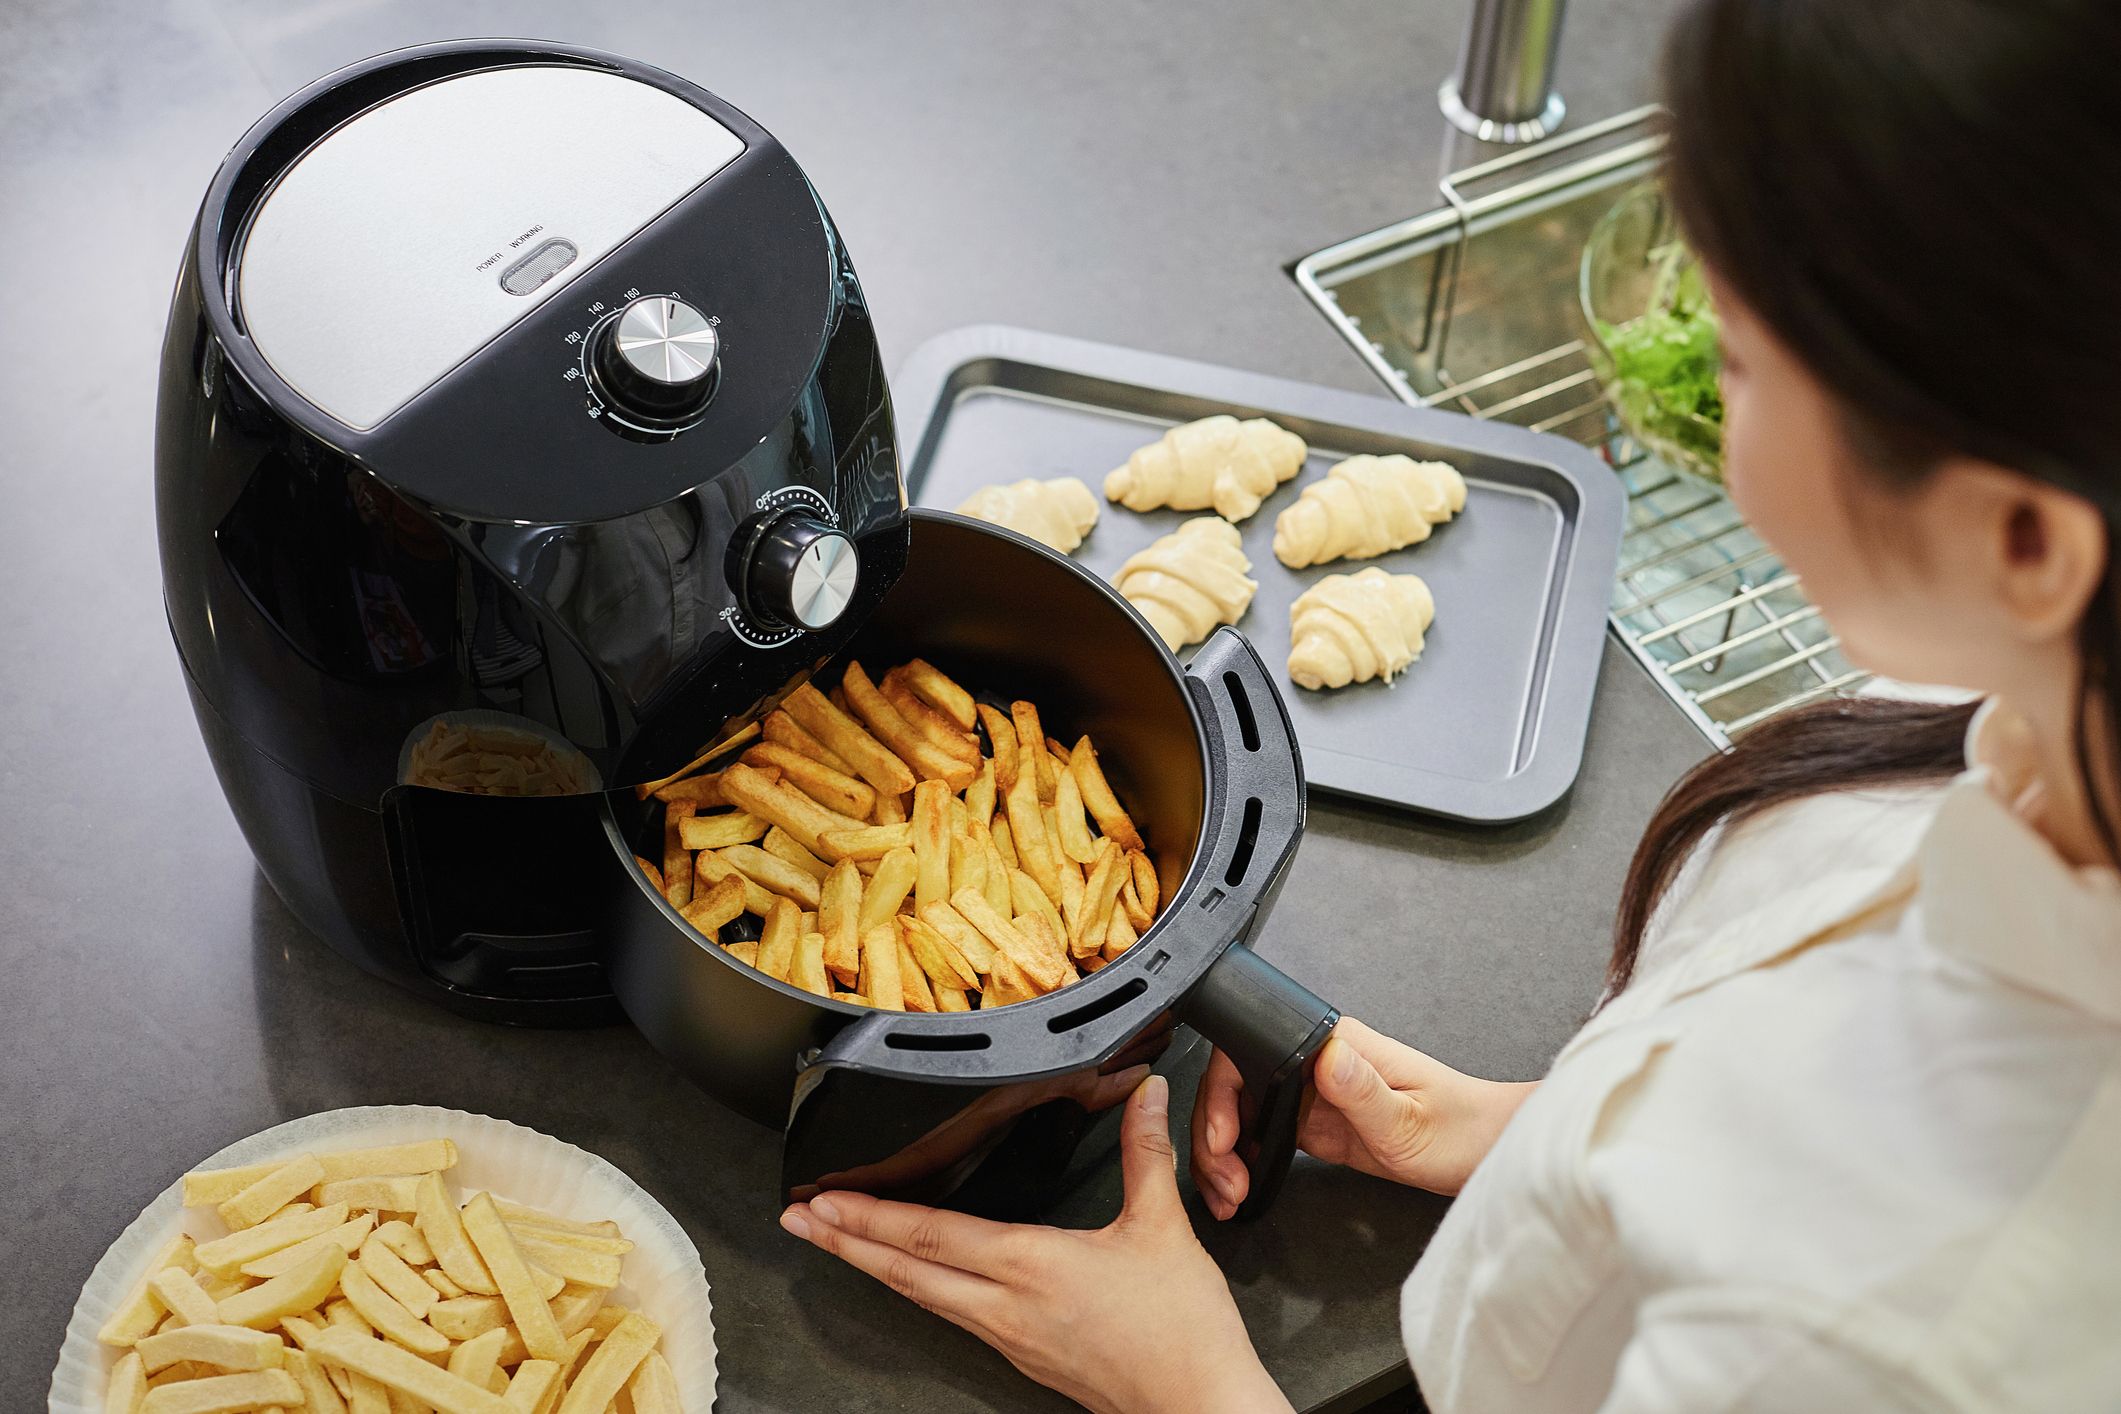 The 6 Best Silicone Air Fryer Liners of 2023